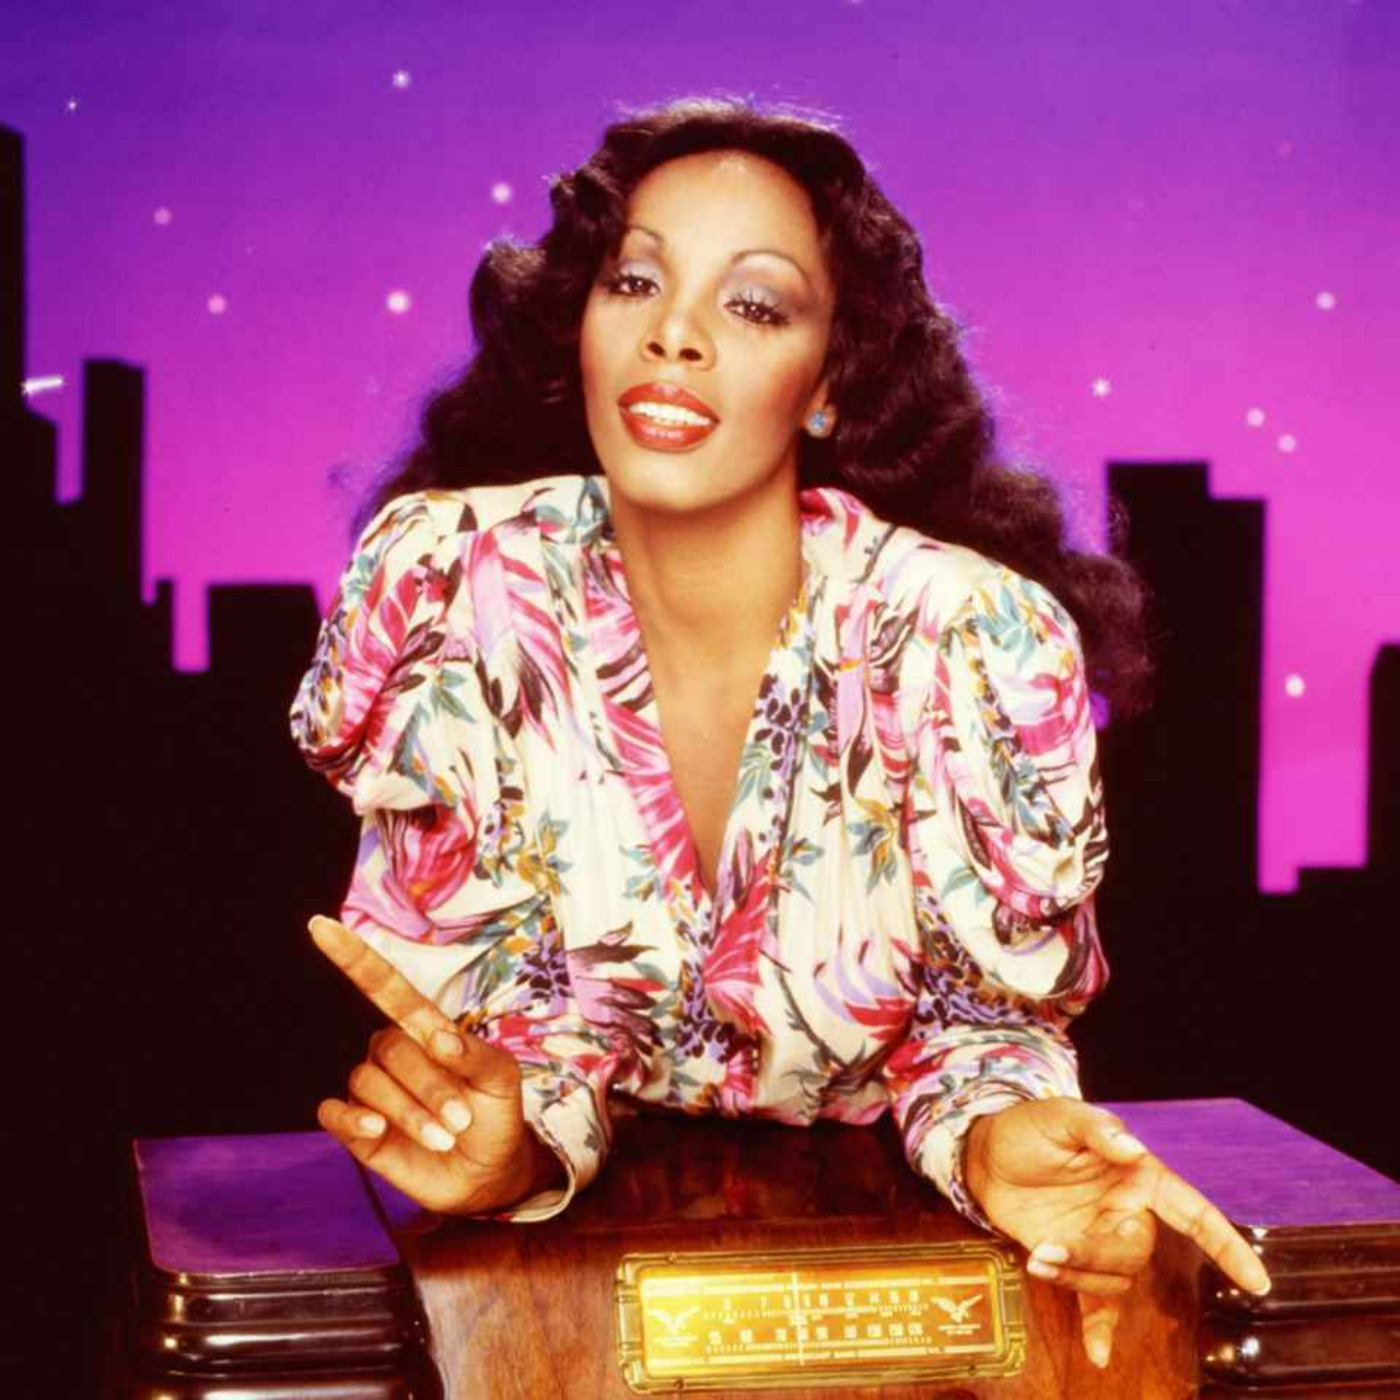 Donna Summer/Whatever Happened to Baby Jane? Image